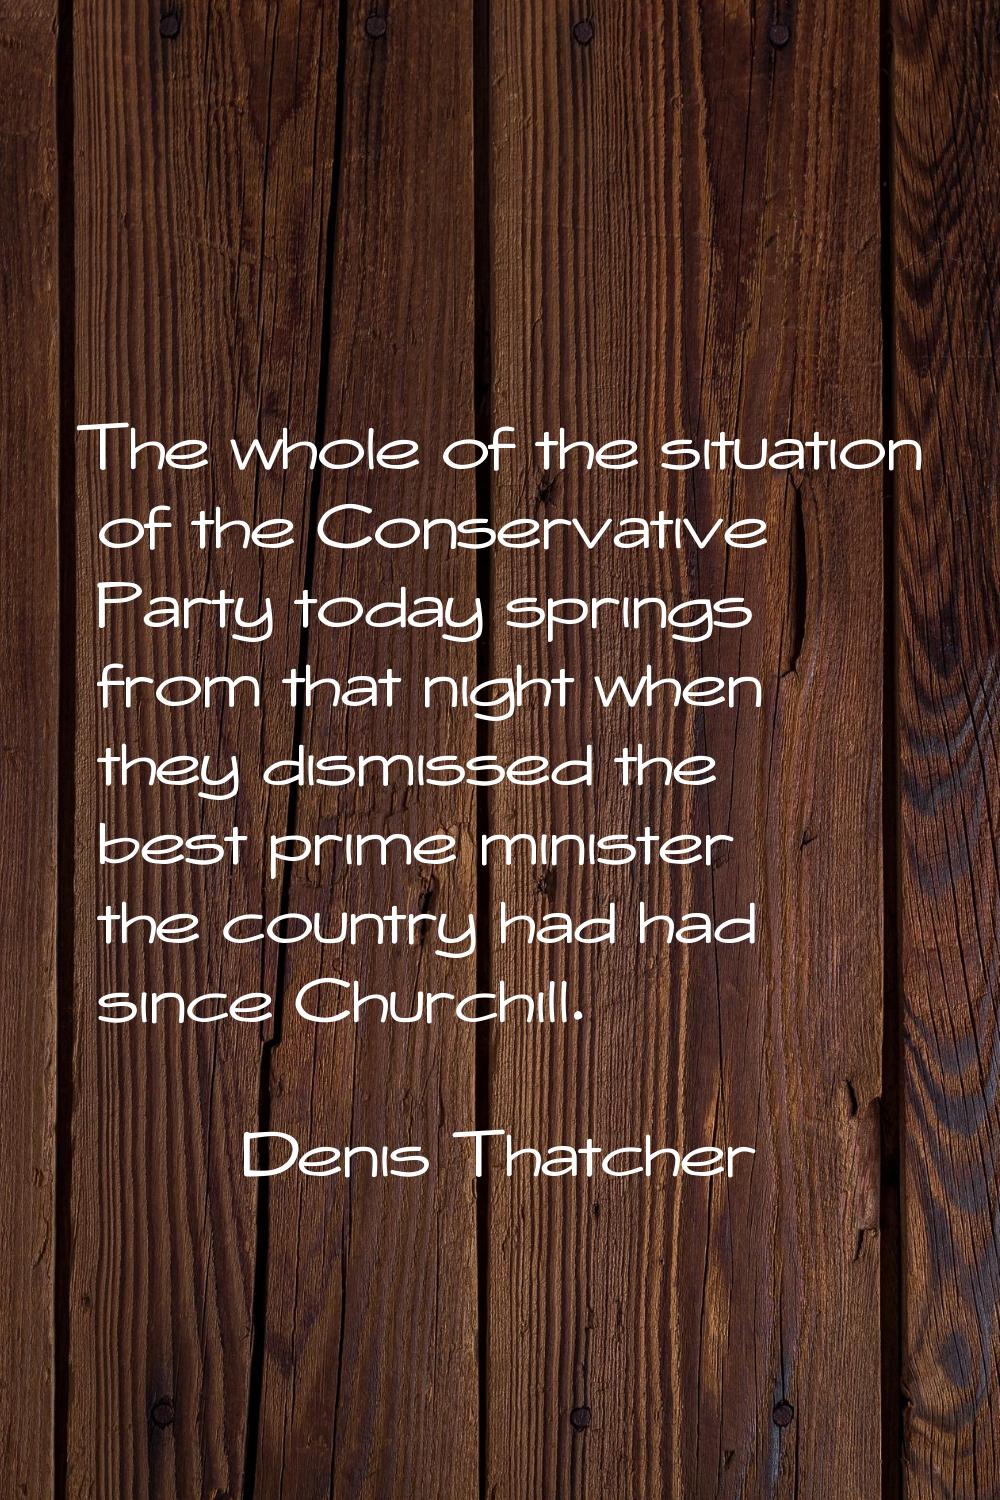 The whole of the situation of the Conservative Party today springs from that night when they dismis